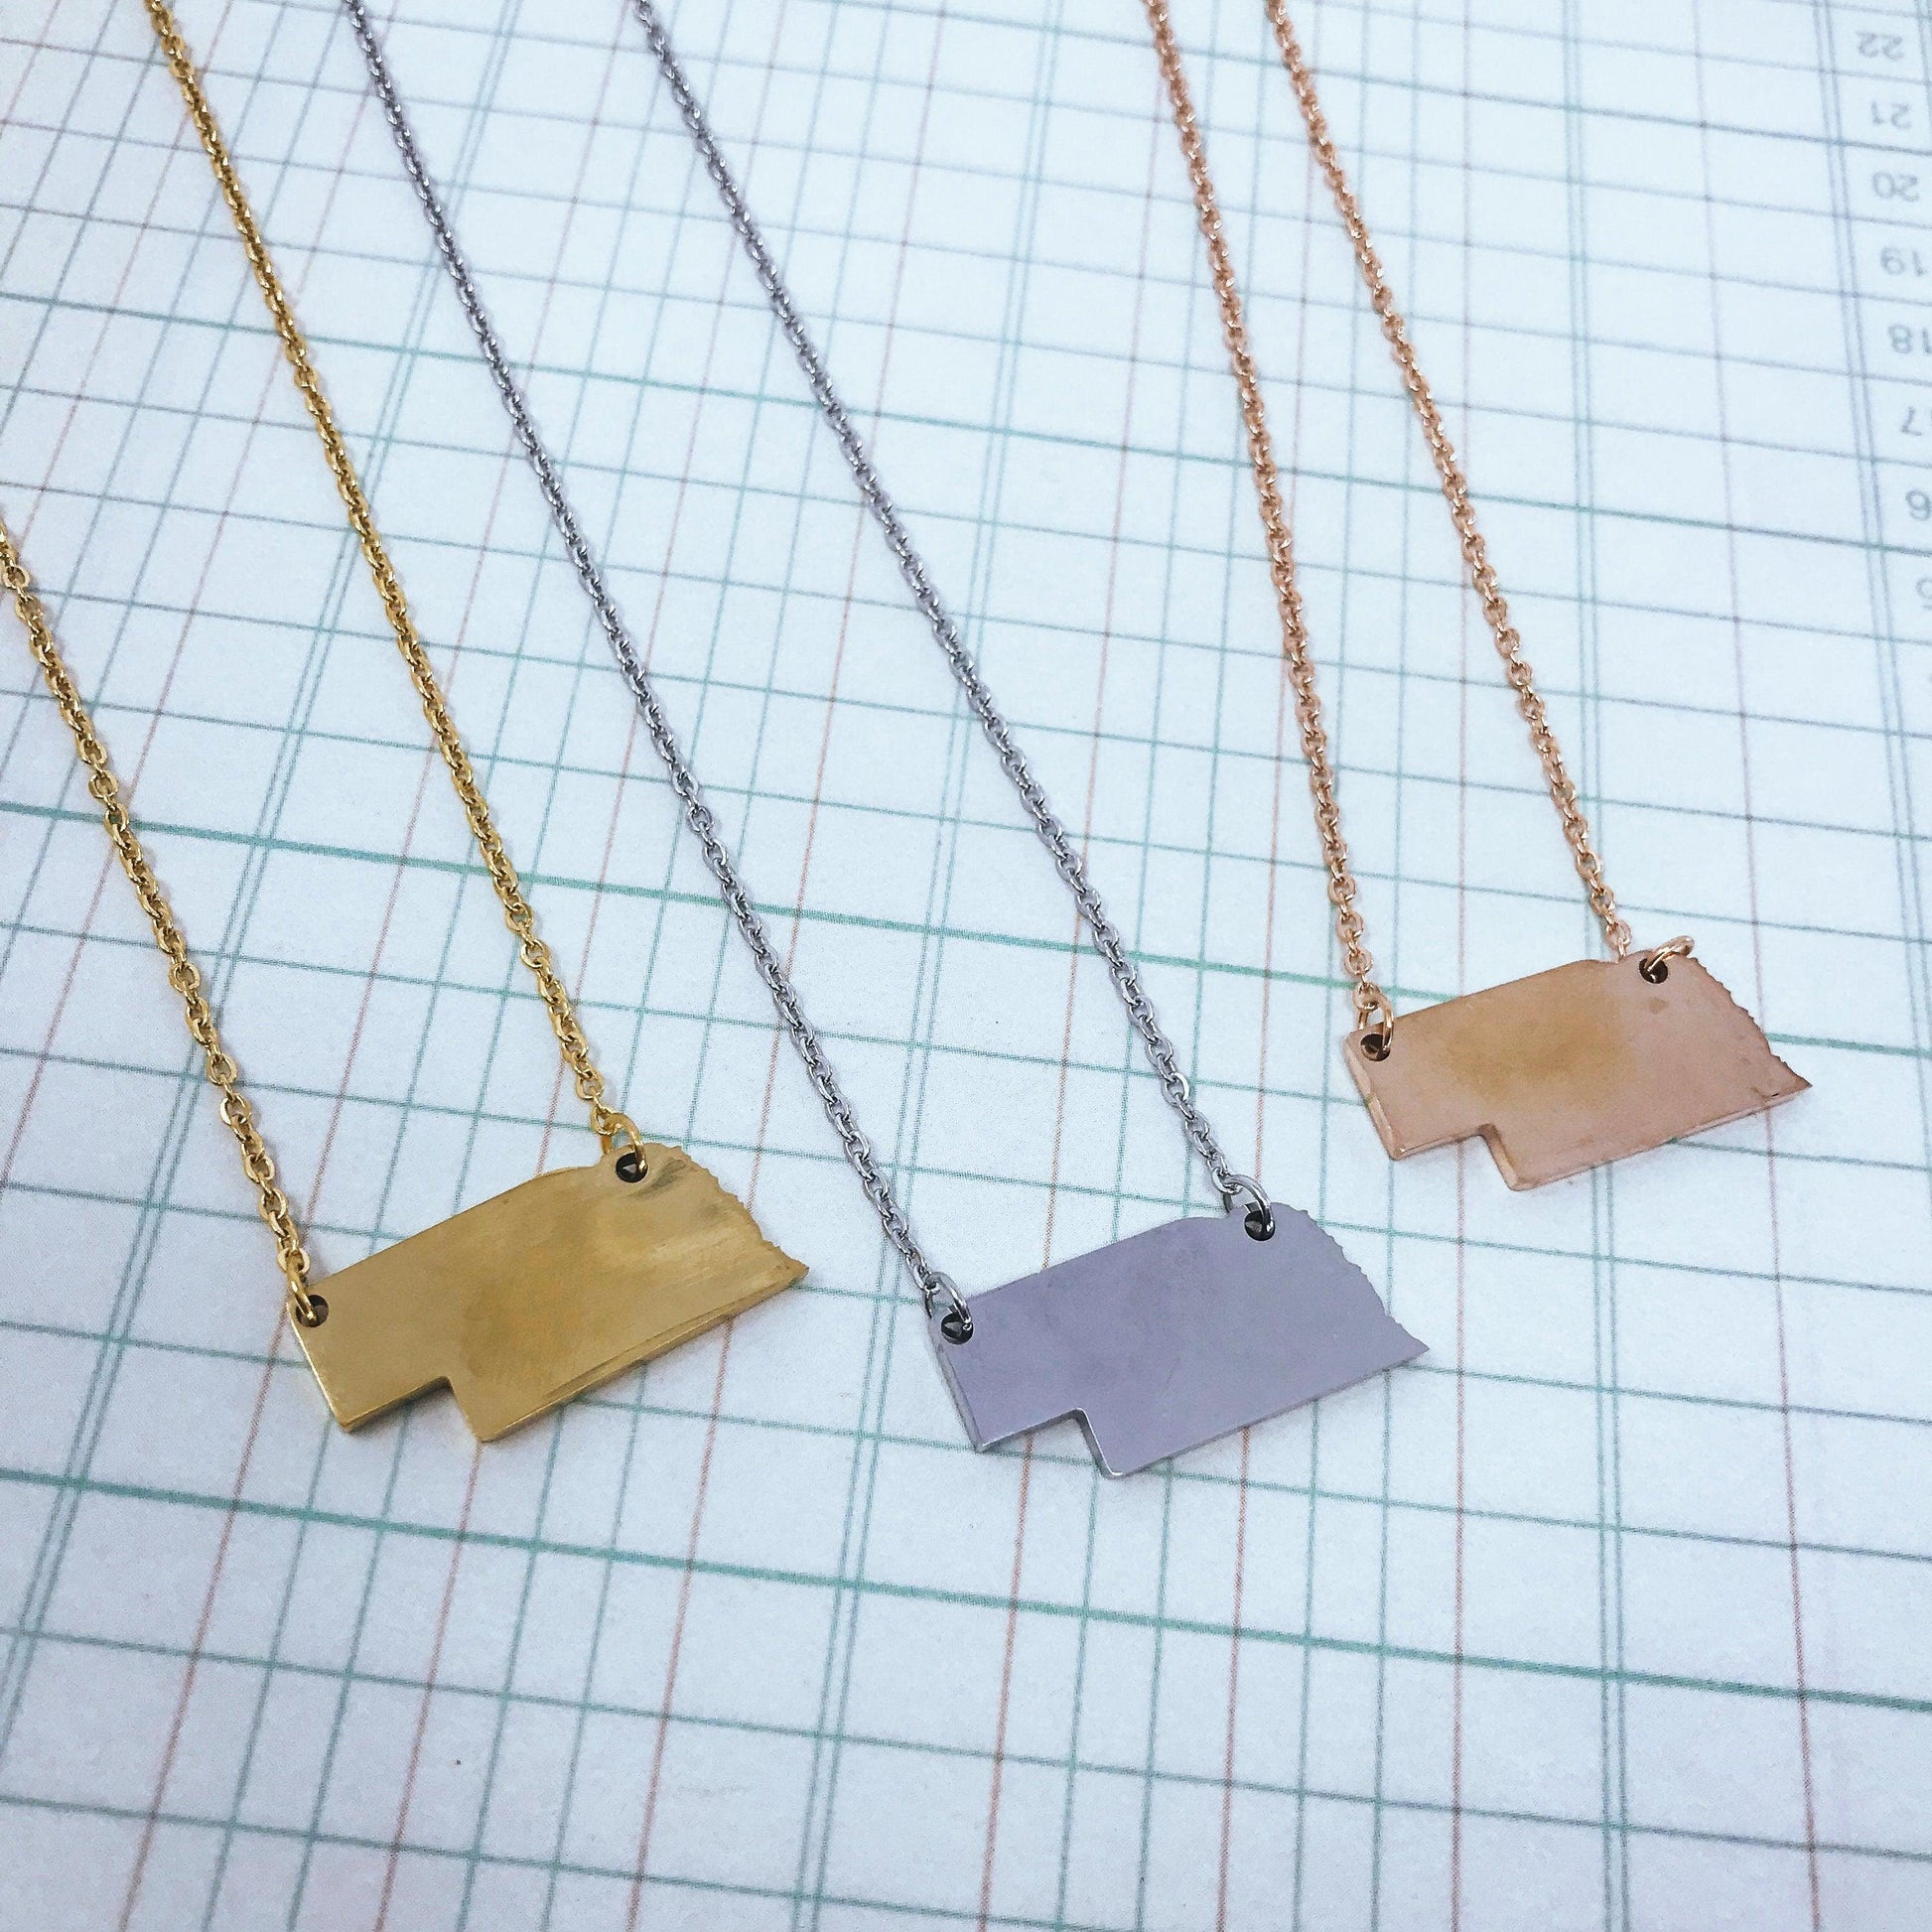 Nebraska State Silhouette Necklaces in 3 different colors: Gold, Silver & Rose Gold